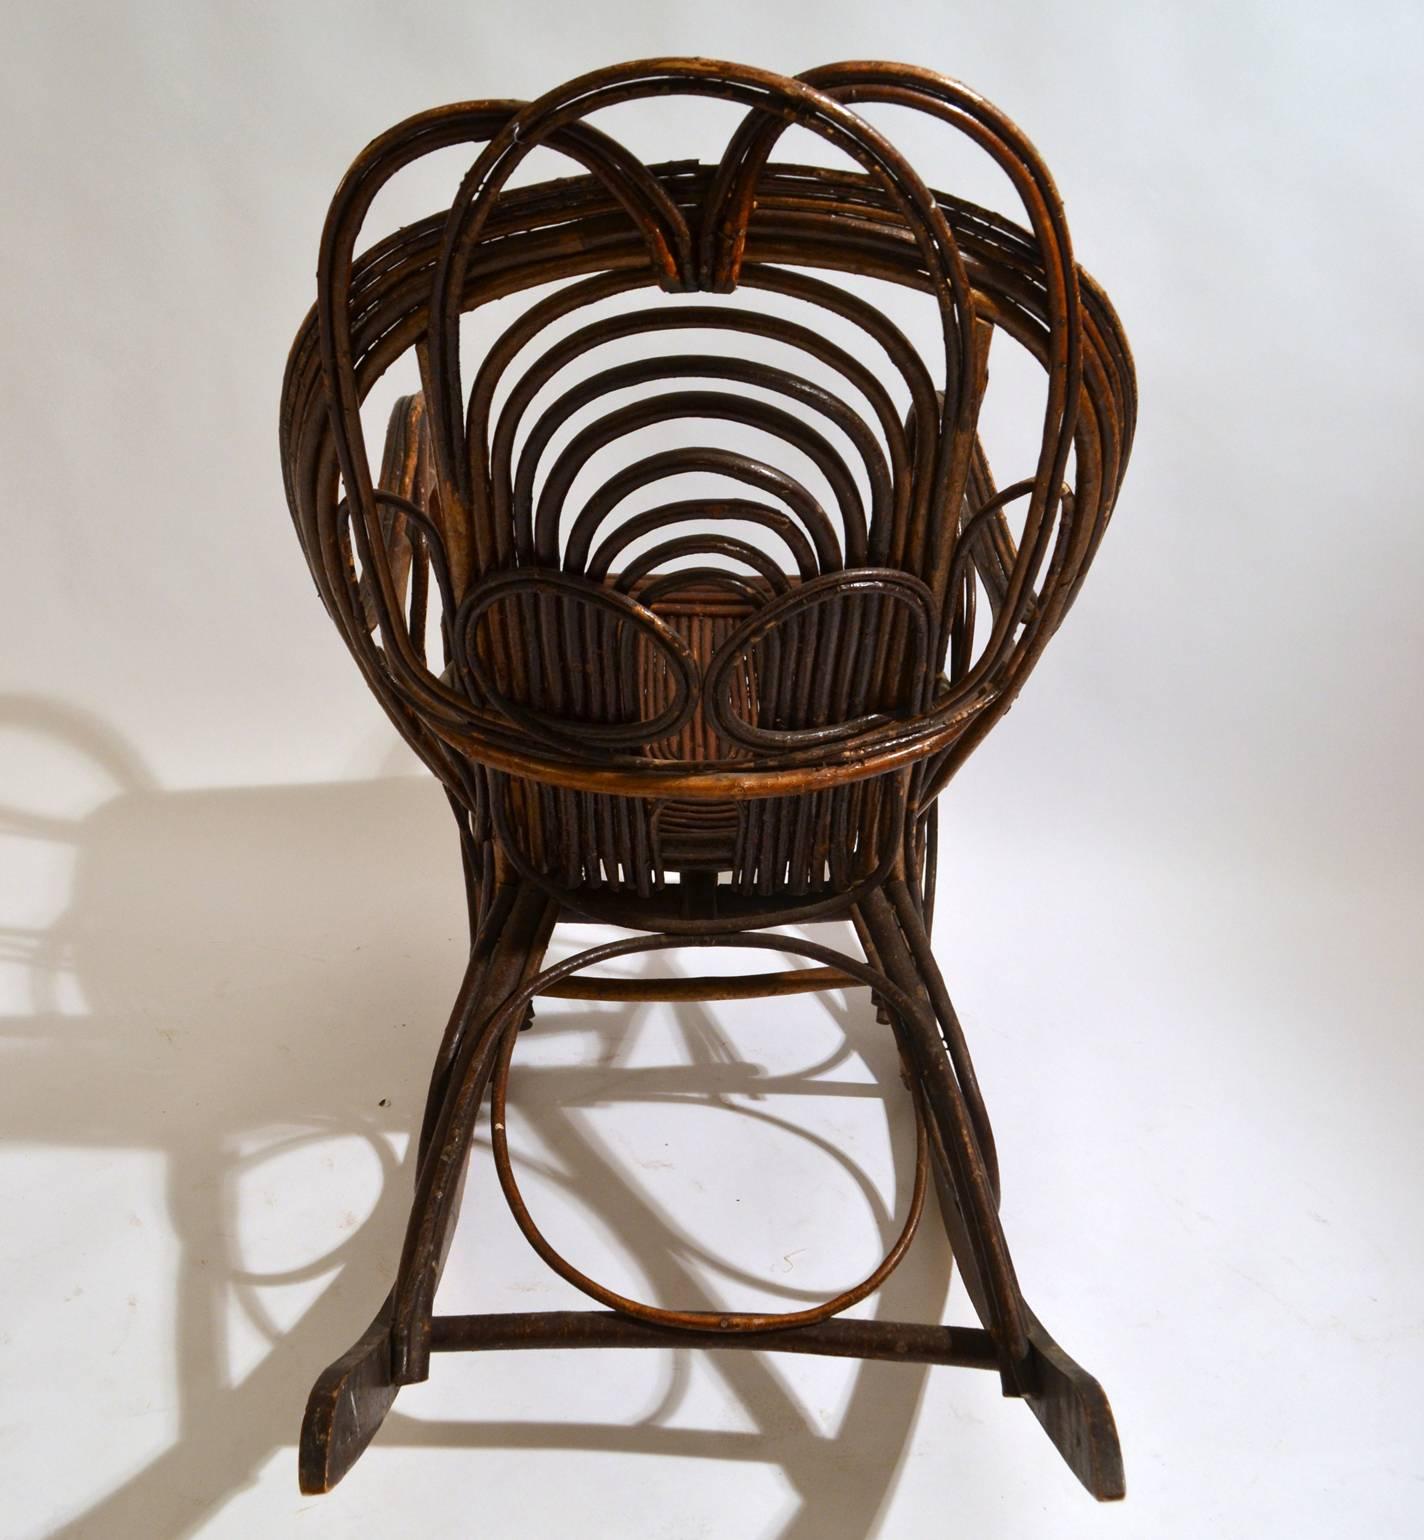 20th Century Rocking Chair in Bentwood Willow, Swedish, 1900-1920